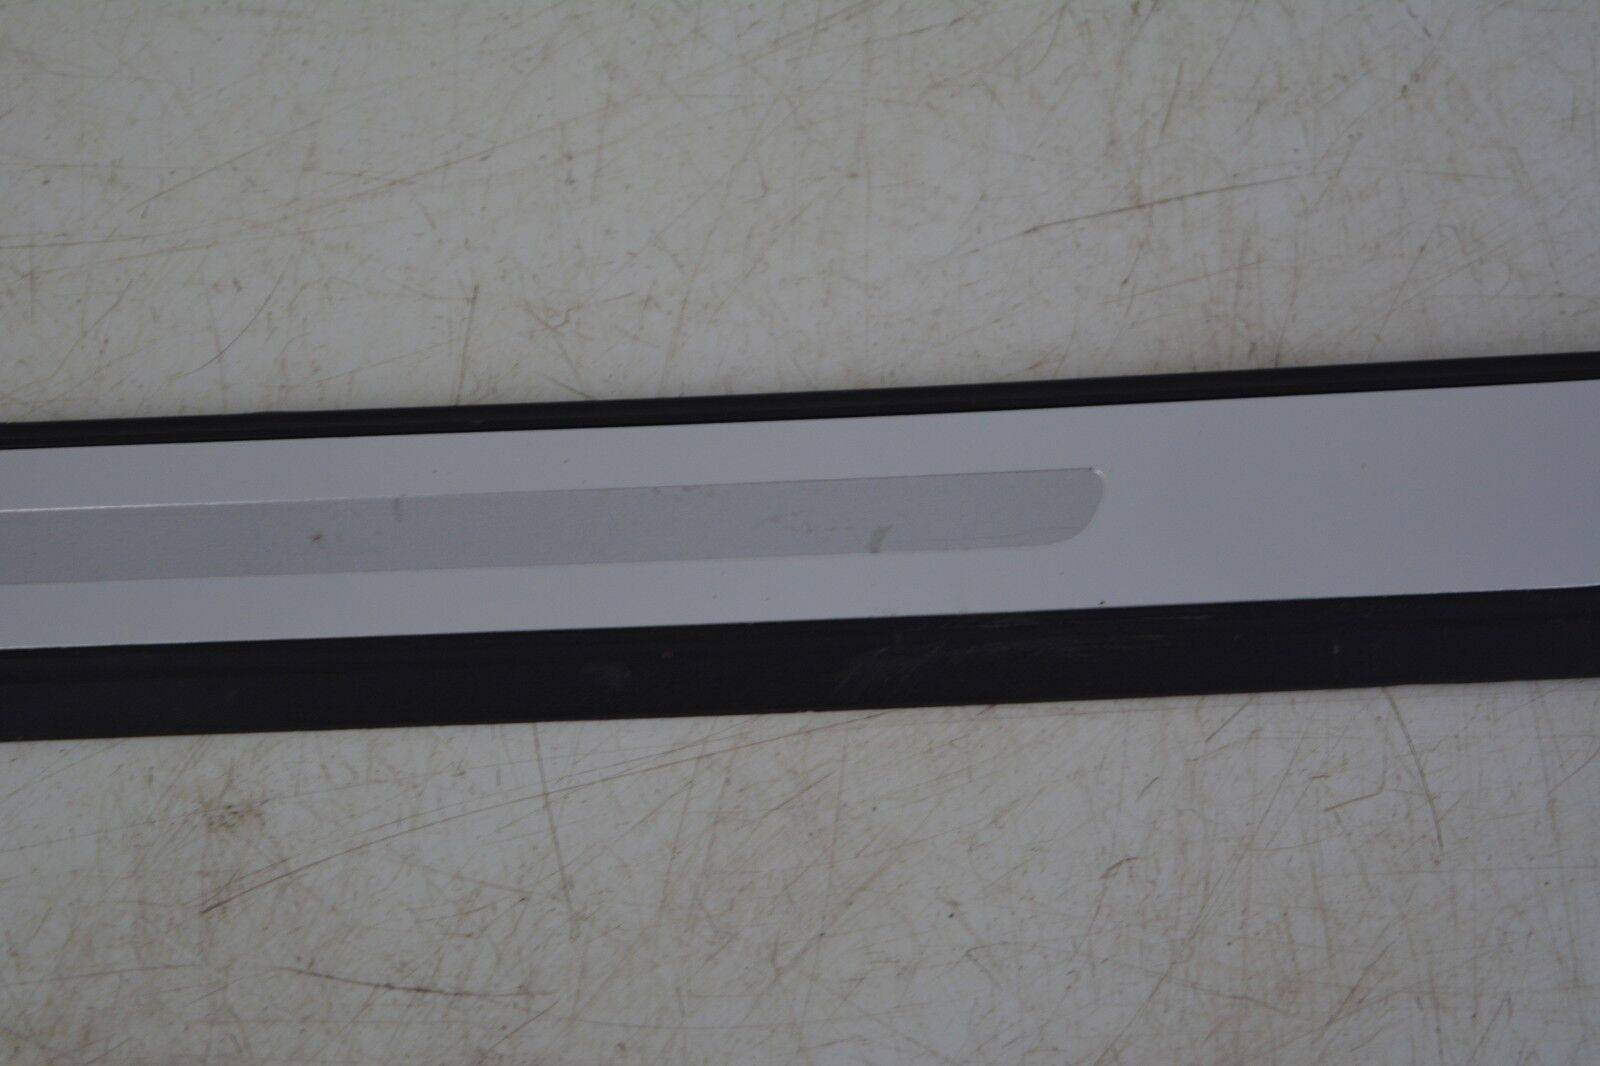 Audi-A4-Door-Sill-Entry-Trim-Front-Left-8W0853373F-Genuine-176469540383-3